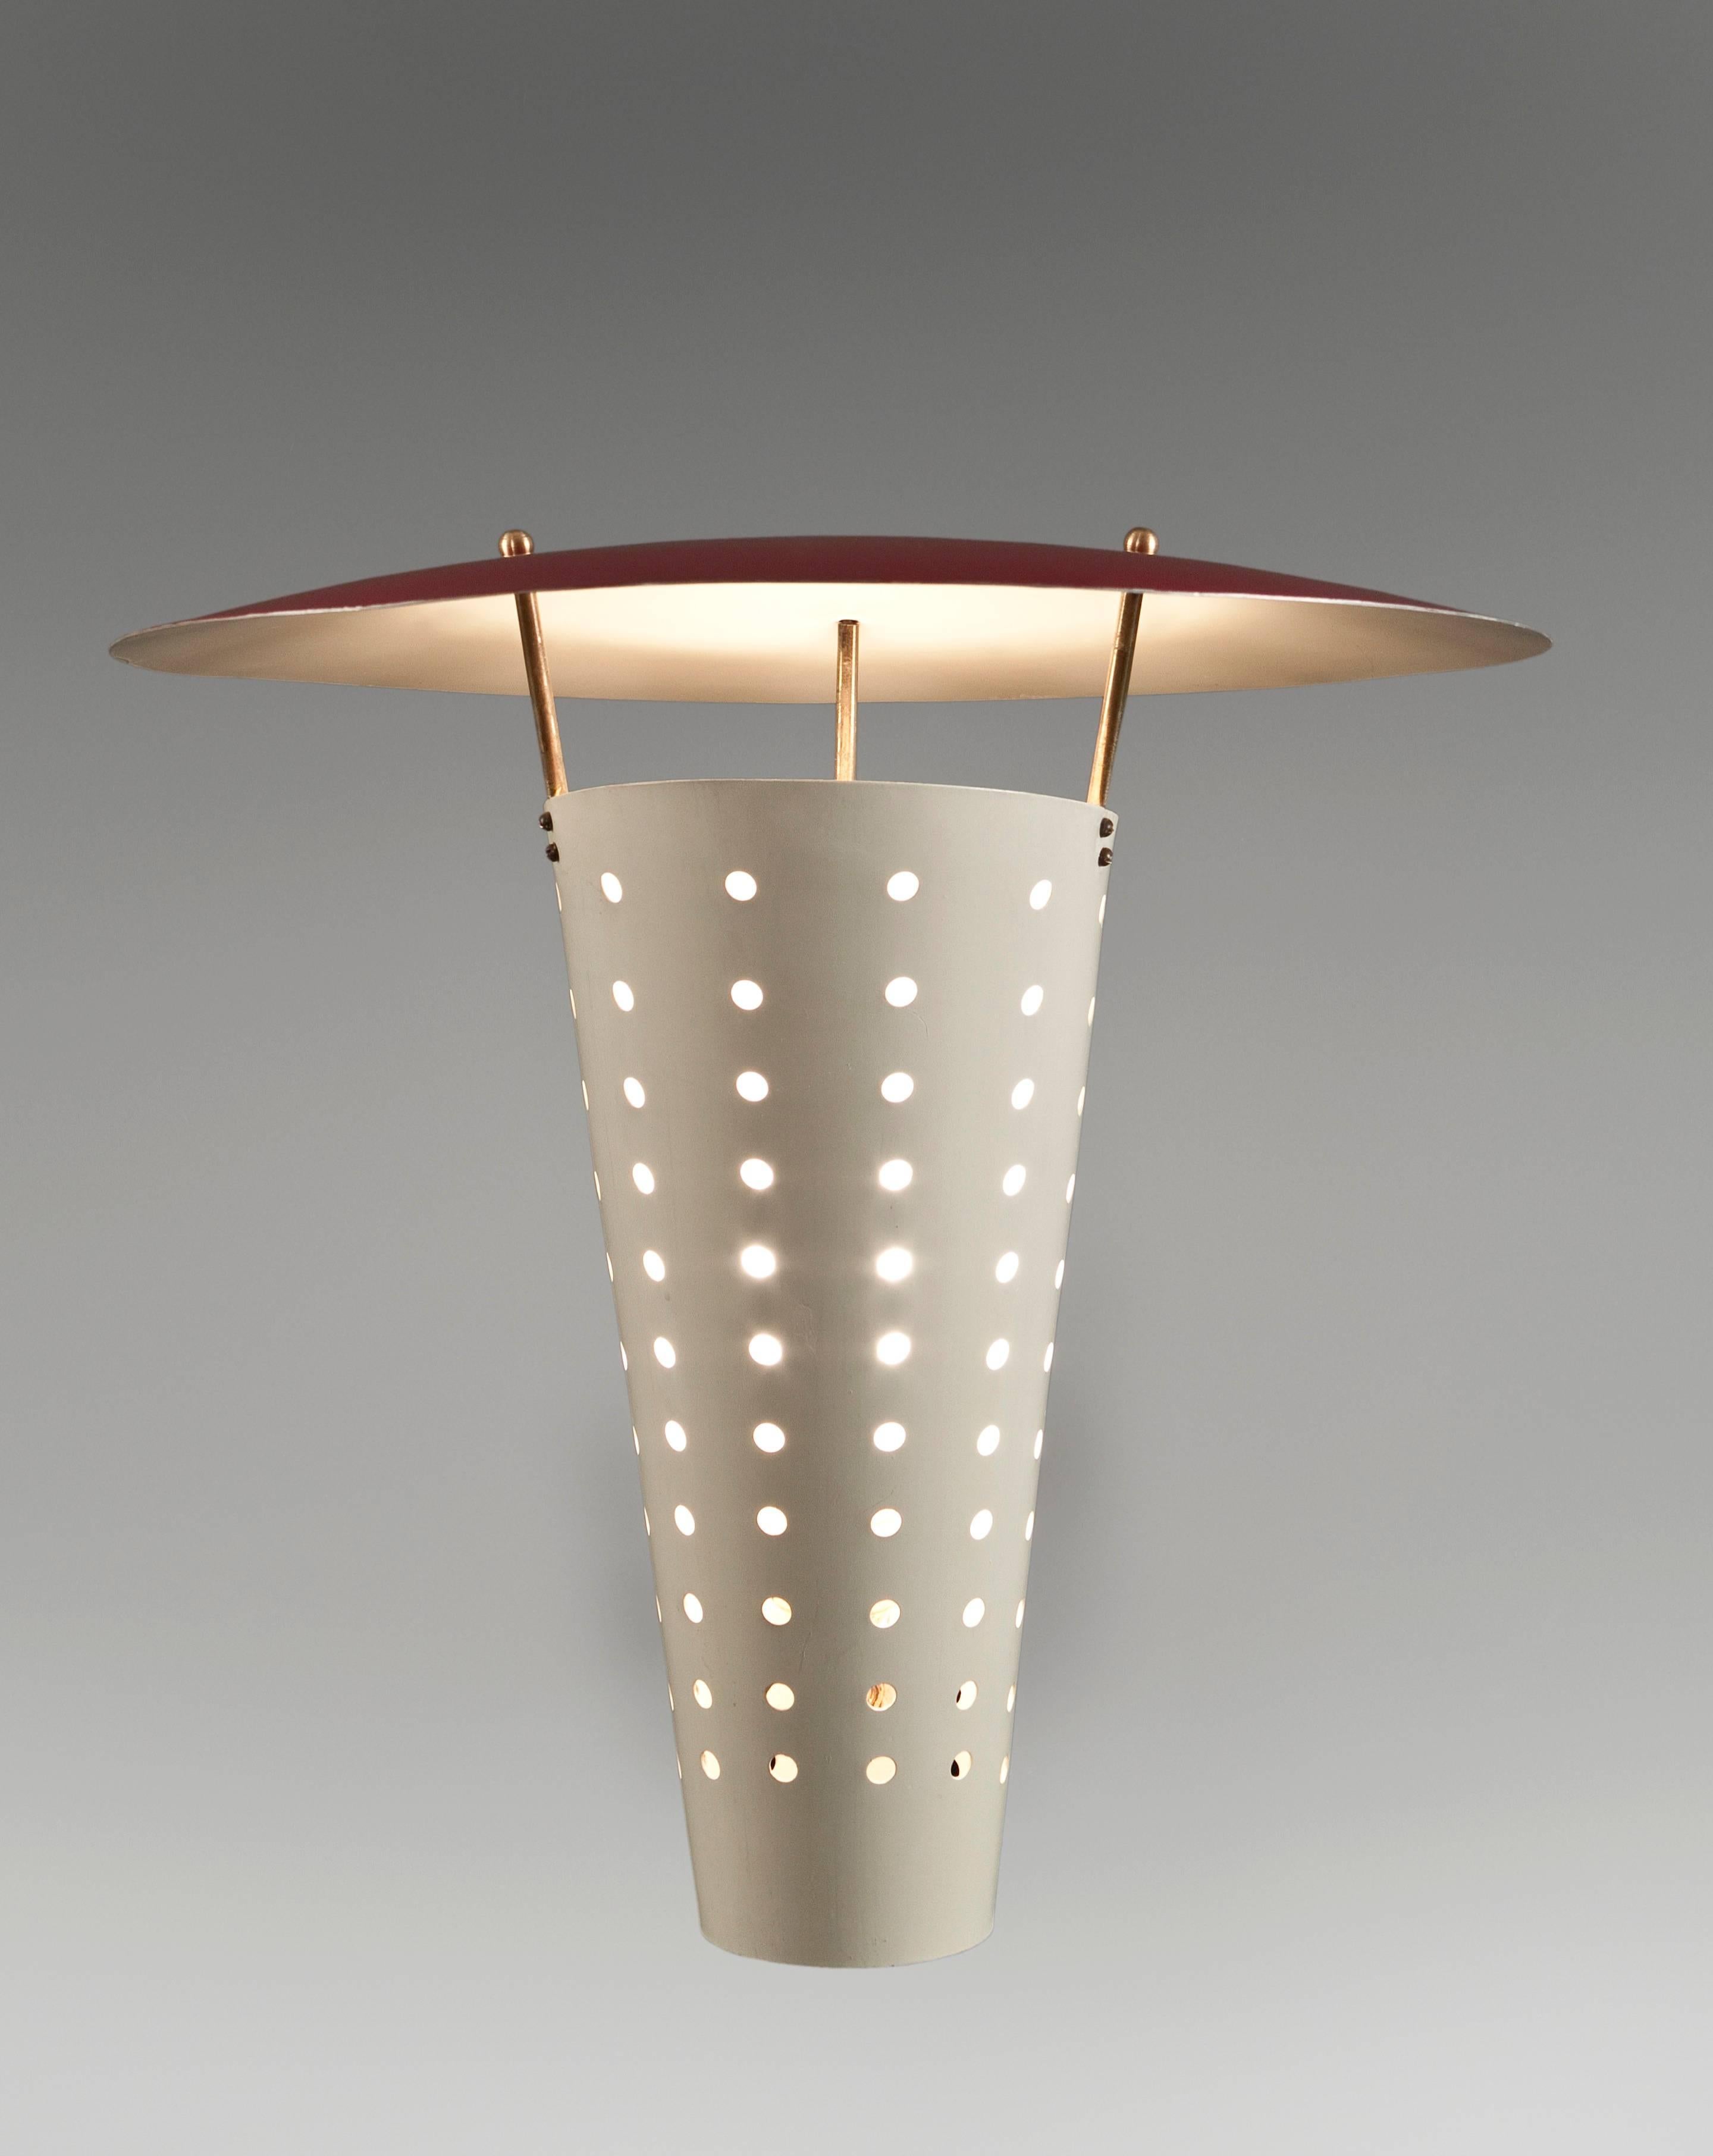 Large scale modernist sconces of a sophisticated yet deceptively simple design. The circular domed reflector raised on three uprights, above a perforated conical diffuser, supported by a rectangular backplate. Original paint in very good